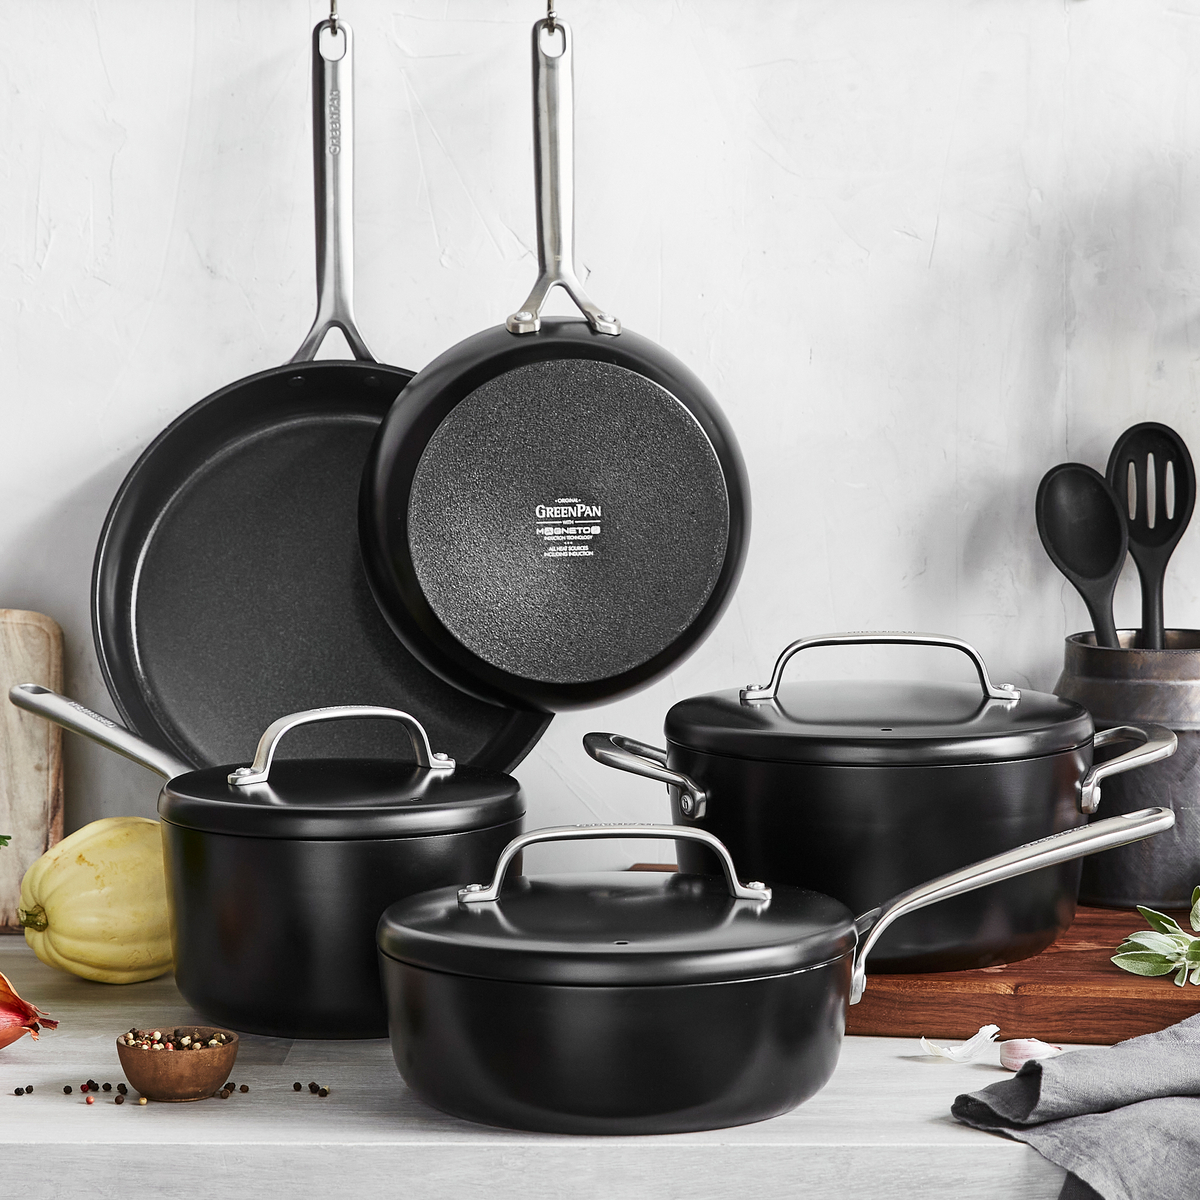 Cookware Sets: Up to 40% Off